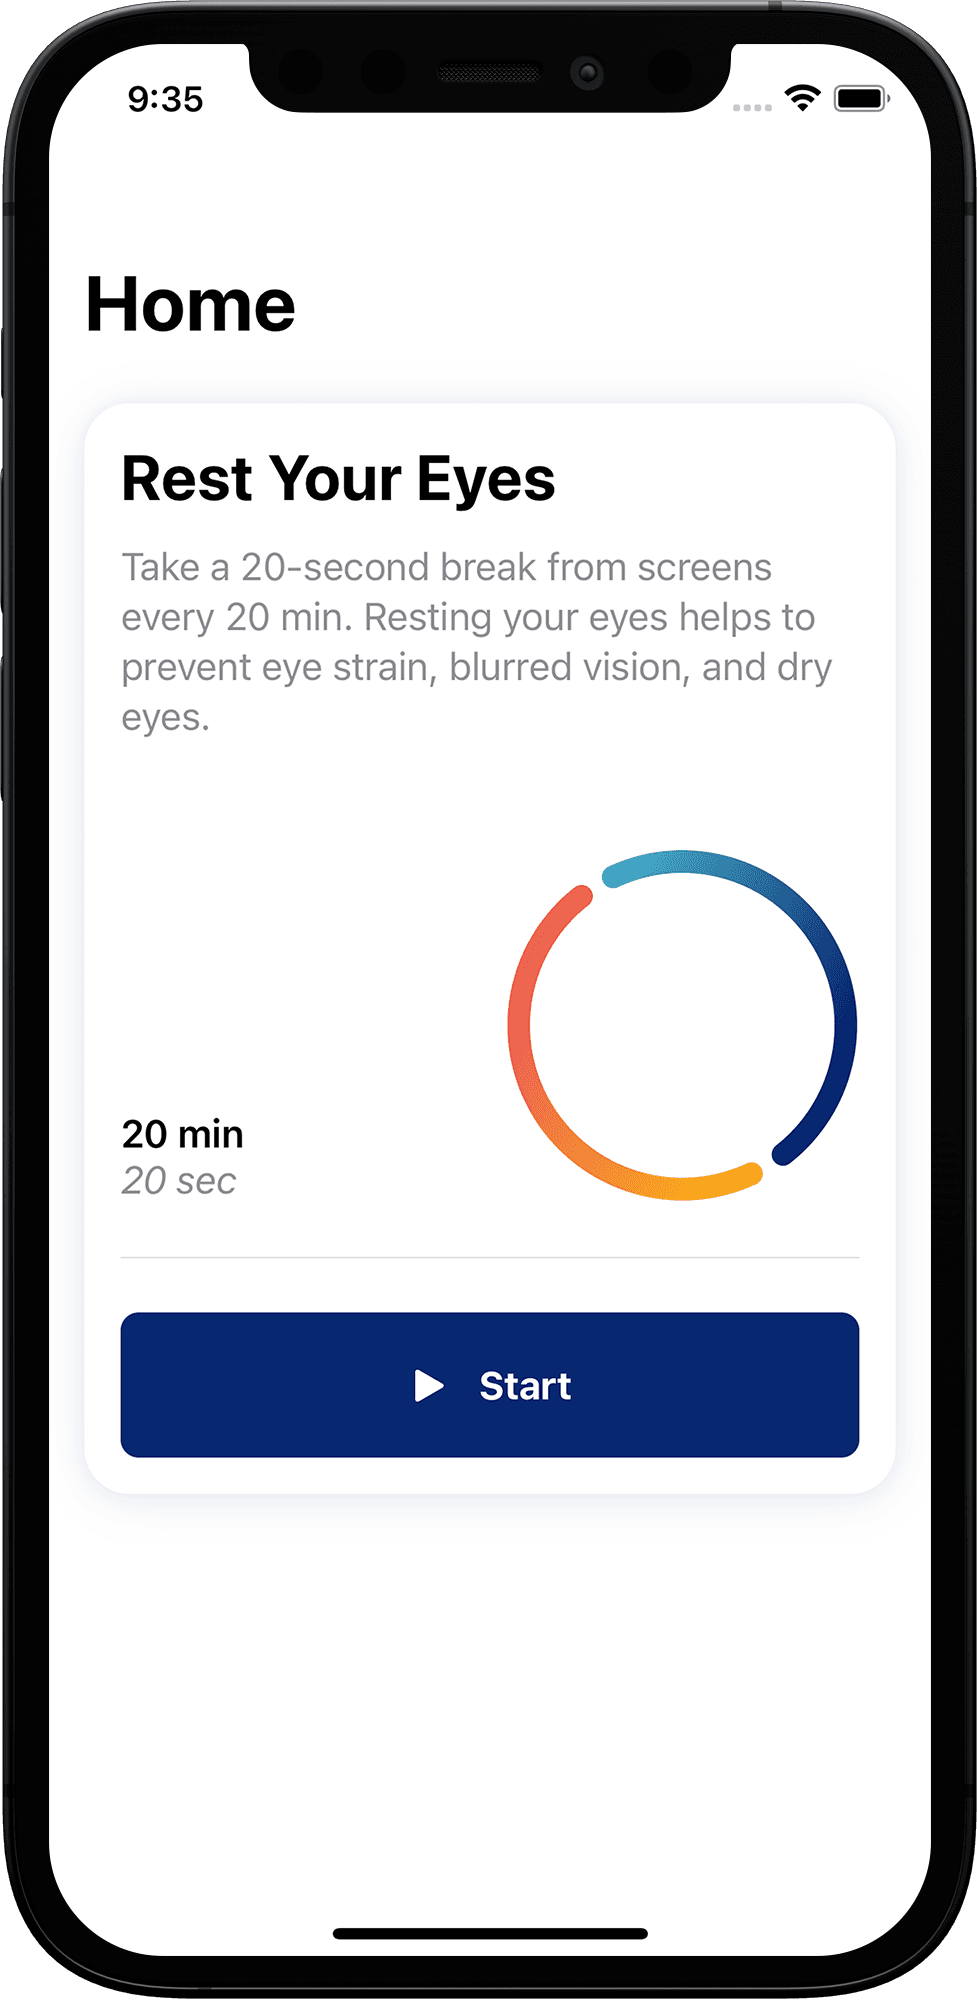 Rest Your Eyes App opened inside an iPhone